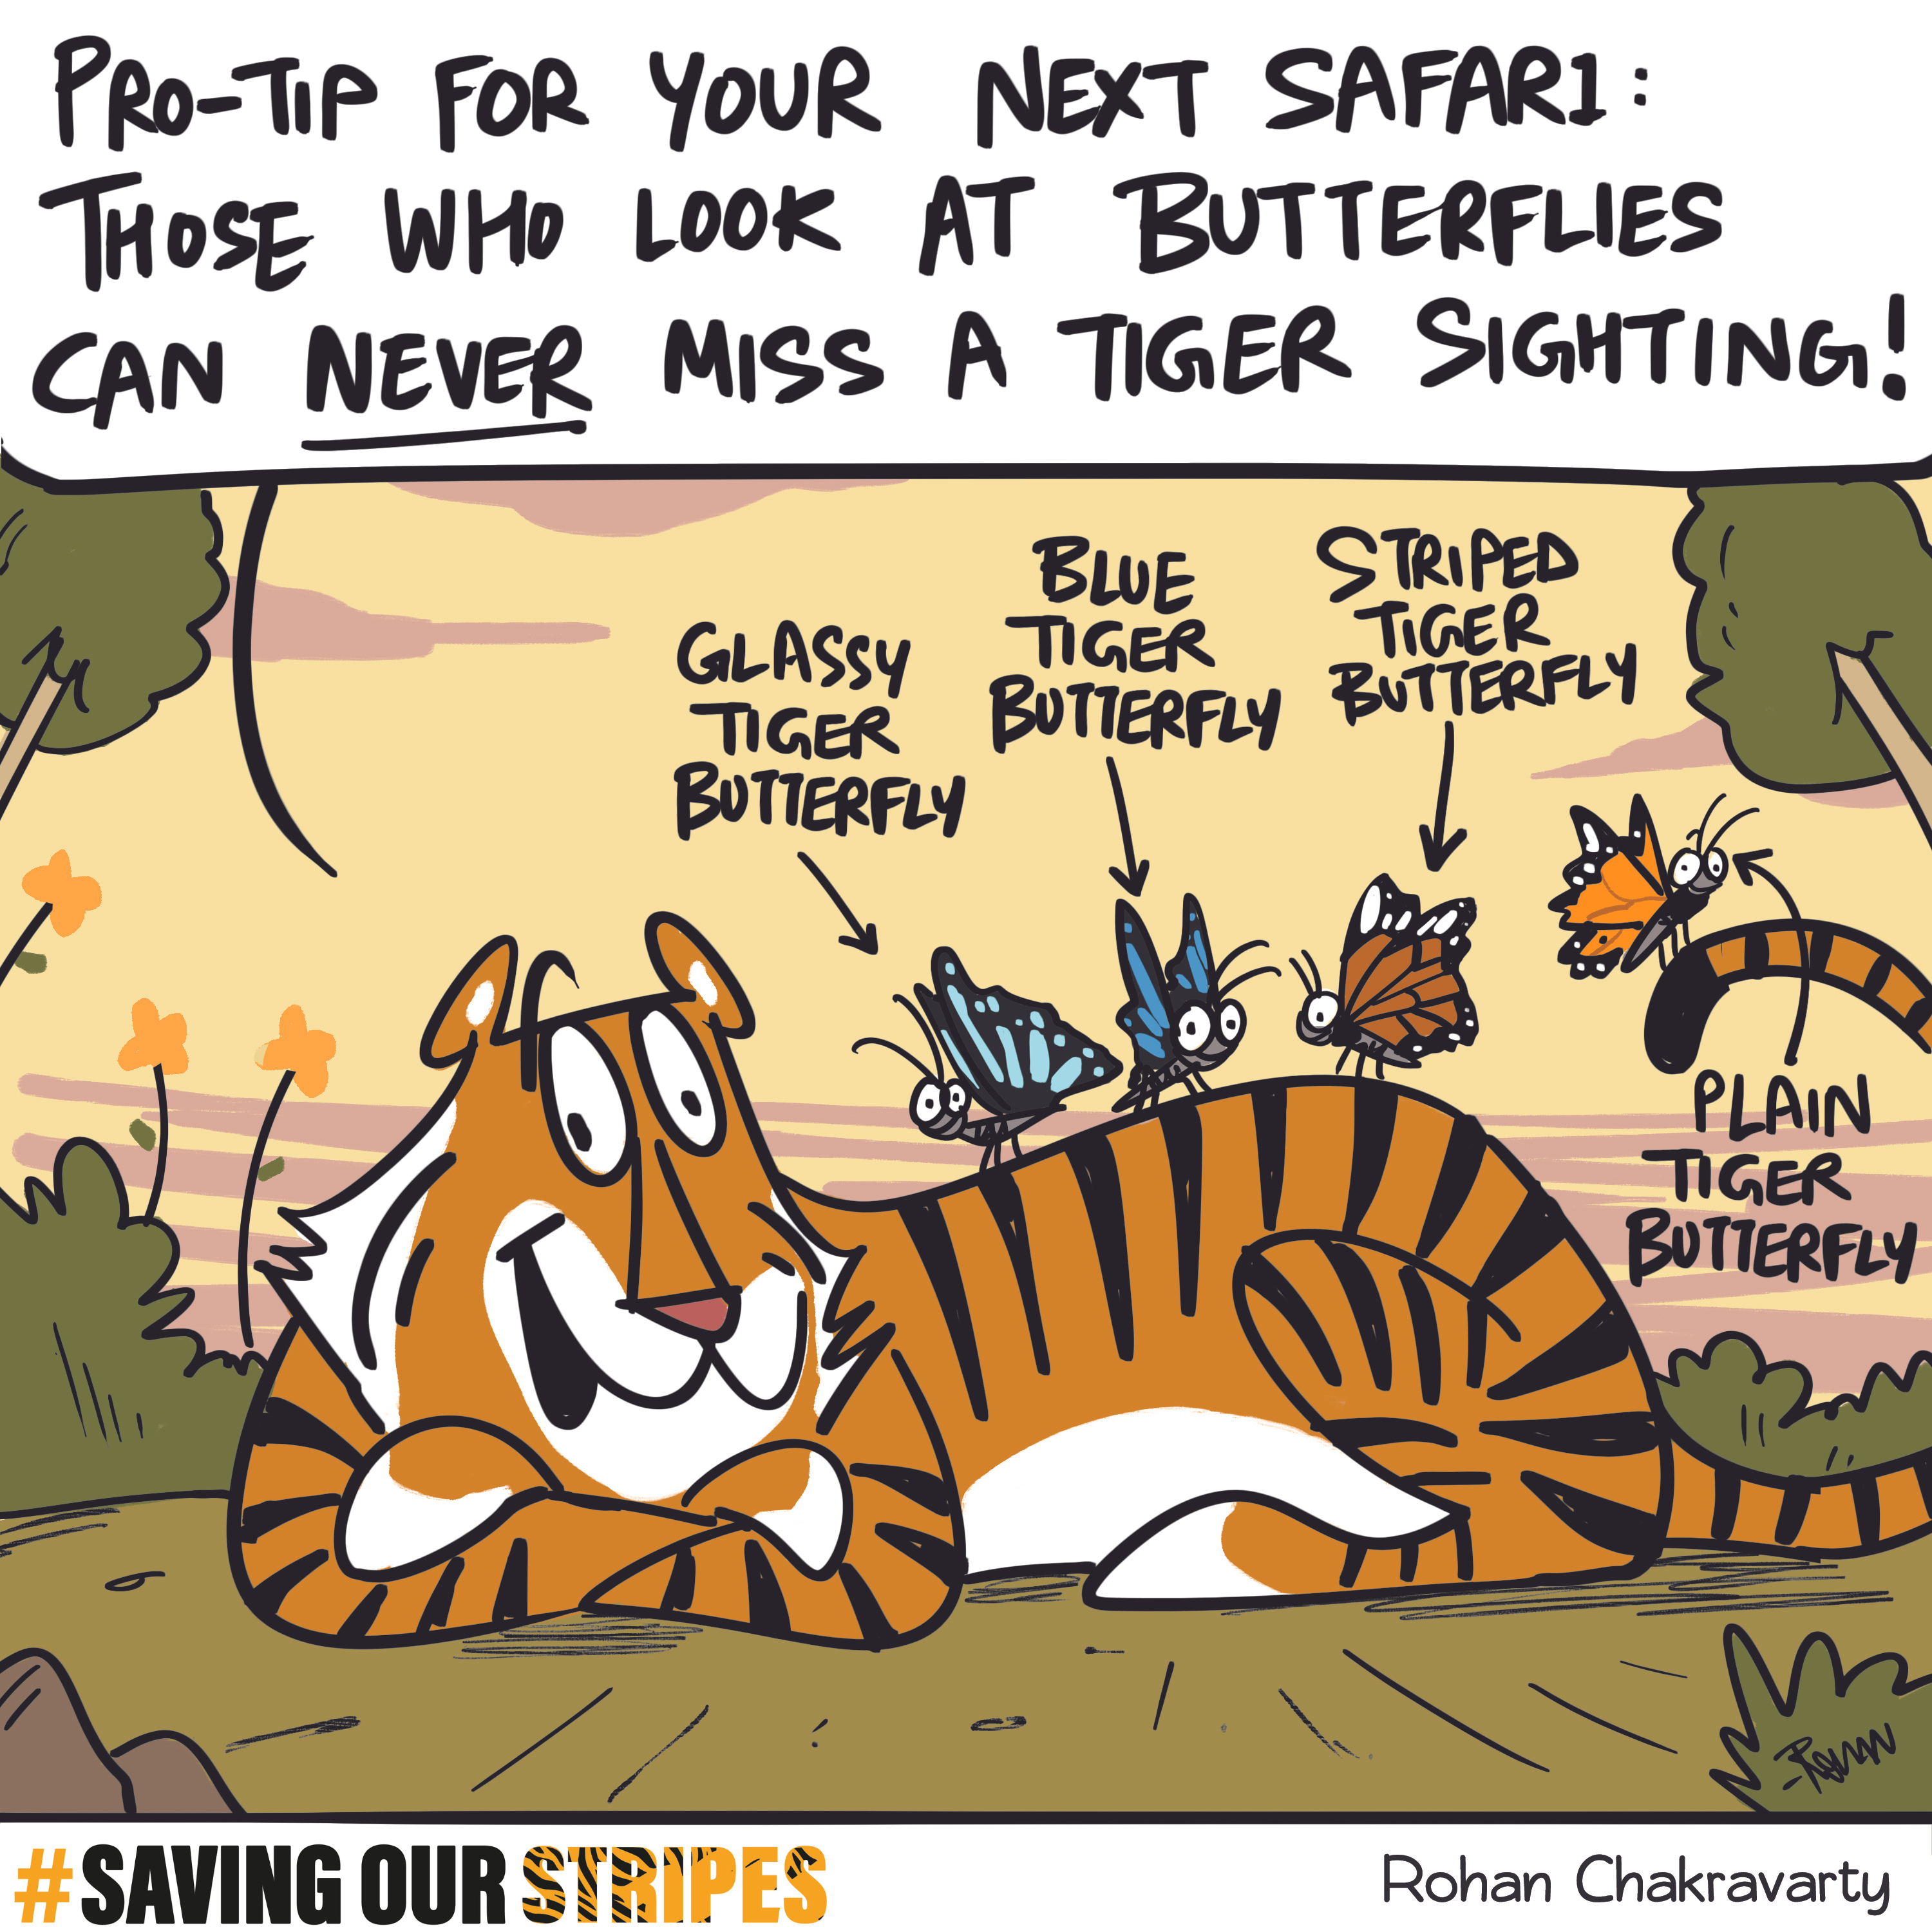 Pro-tip for Tiger Sighting 'Look out for Butterflies'